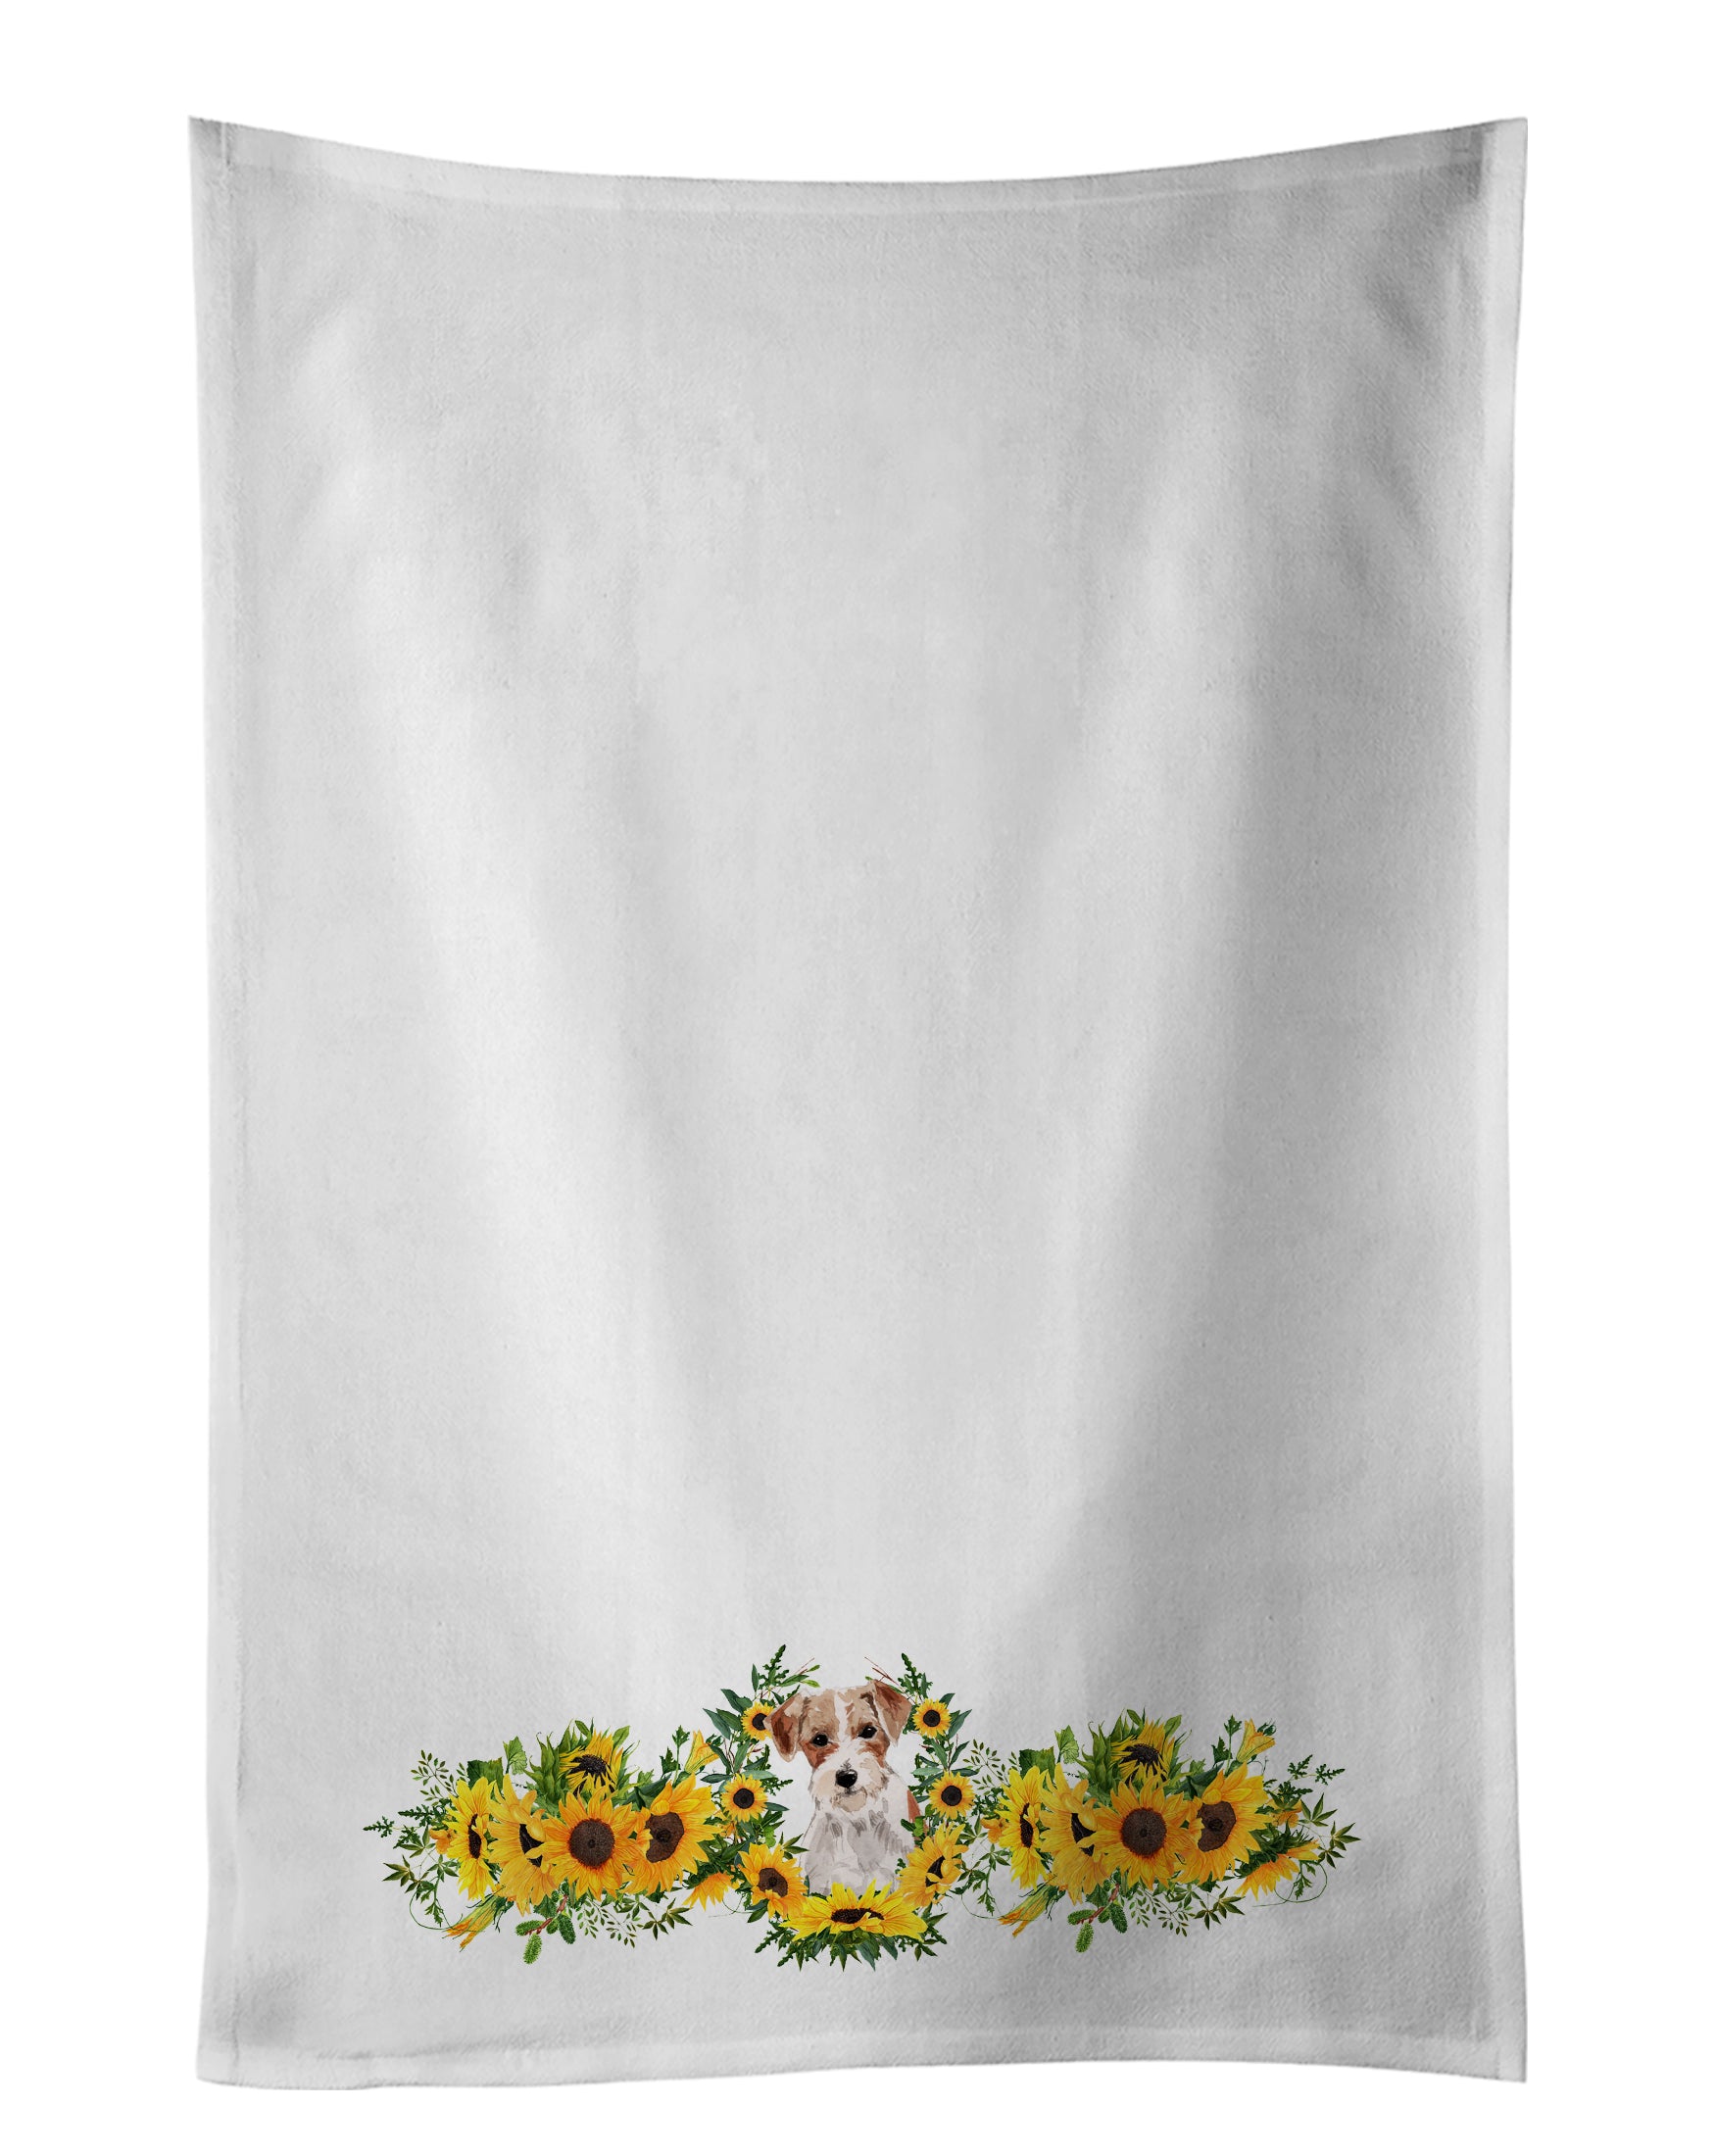 Buy this Jack Russell Terrier in Sunflowers White Kitchen Towel Set of 2